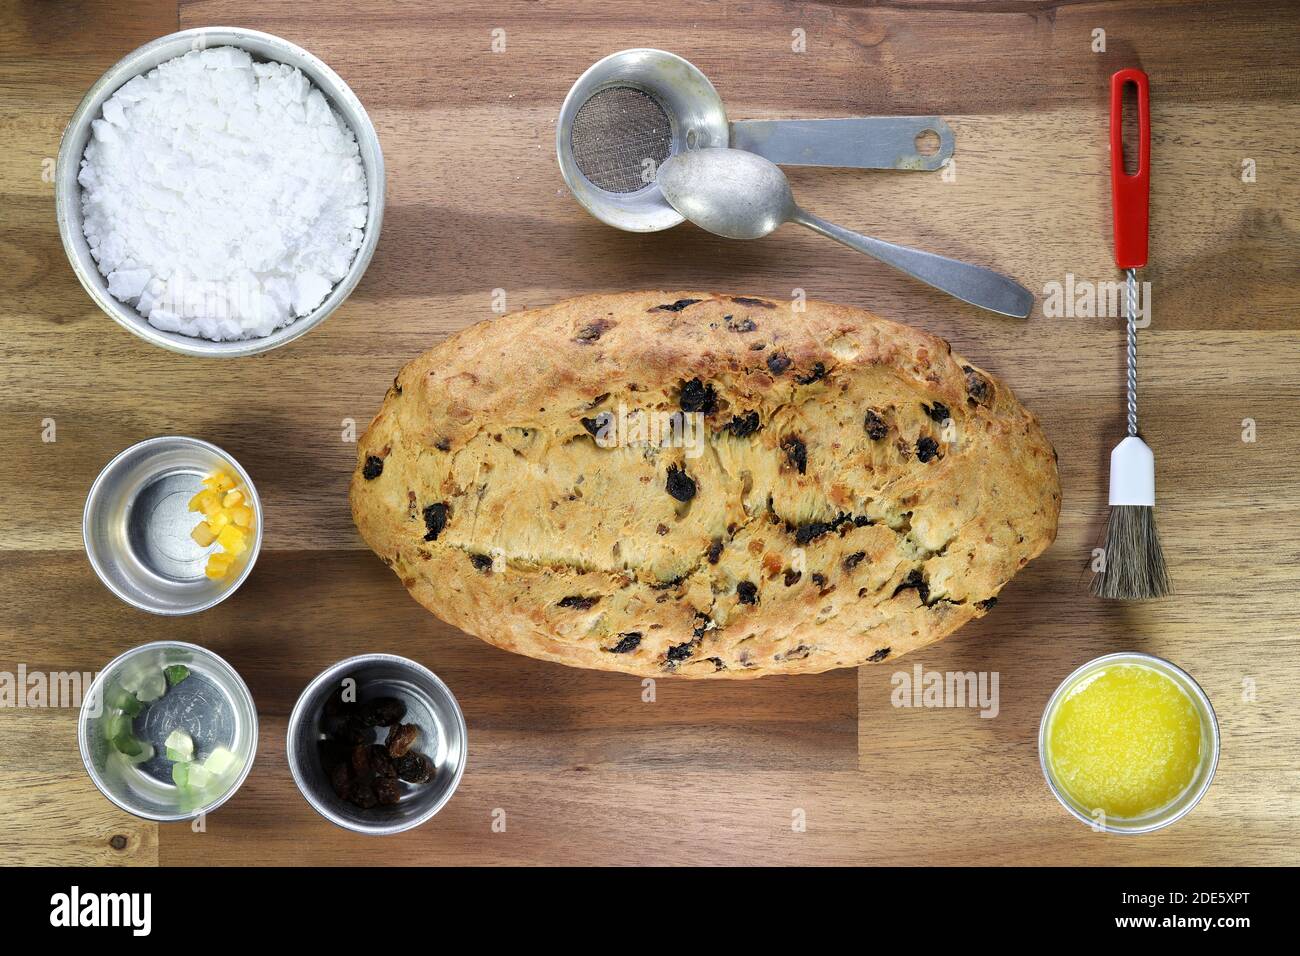 freshly baked traditional Saxon Christmas Stollen with some baking ingredients on wooden background Stock Photo